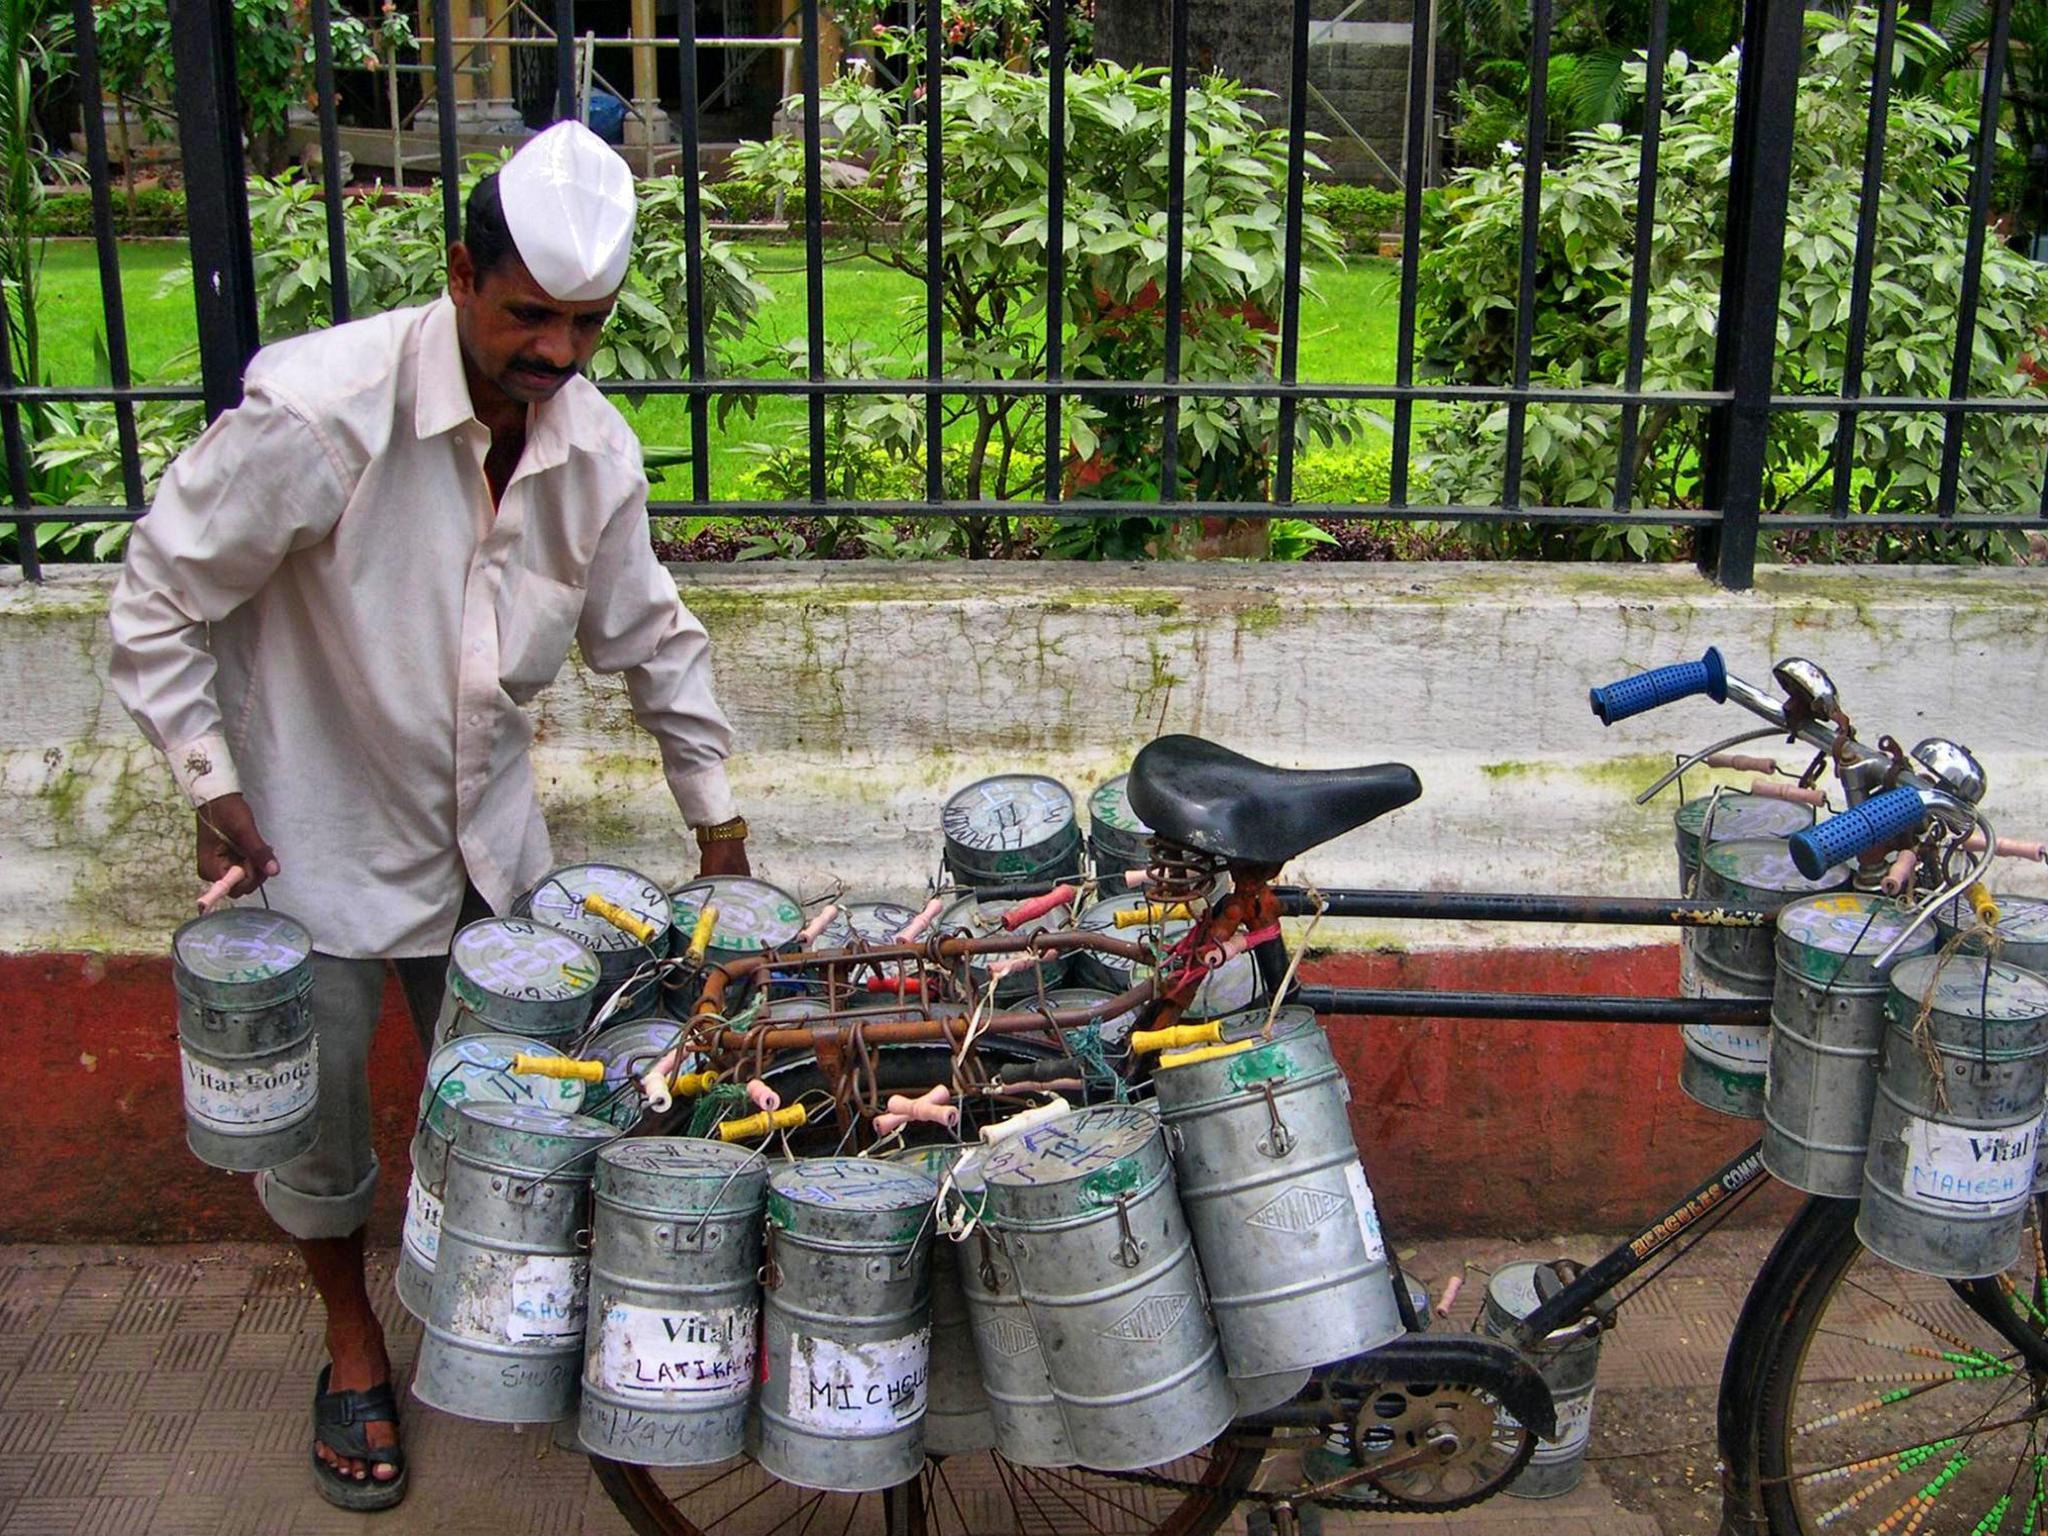 Around 8 million lunches are delivered every year by dabbawalas 